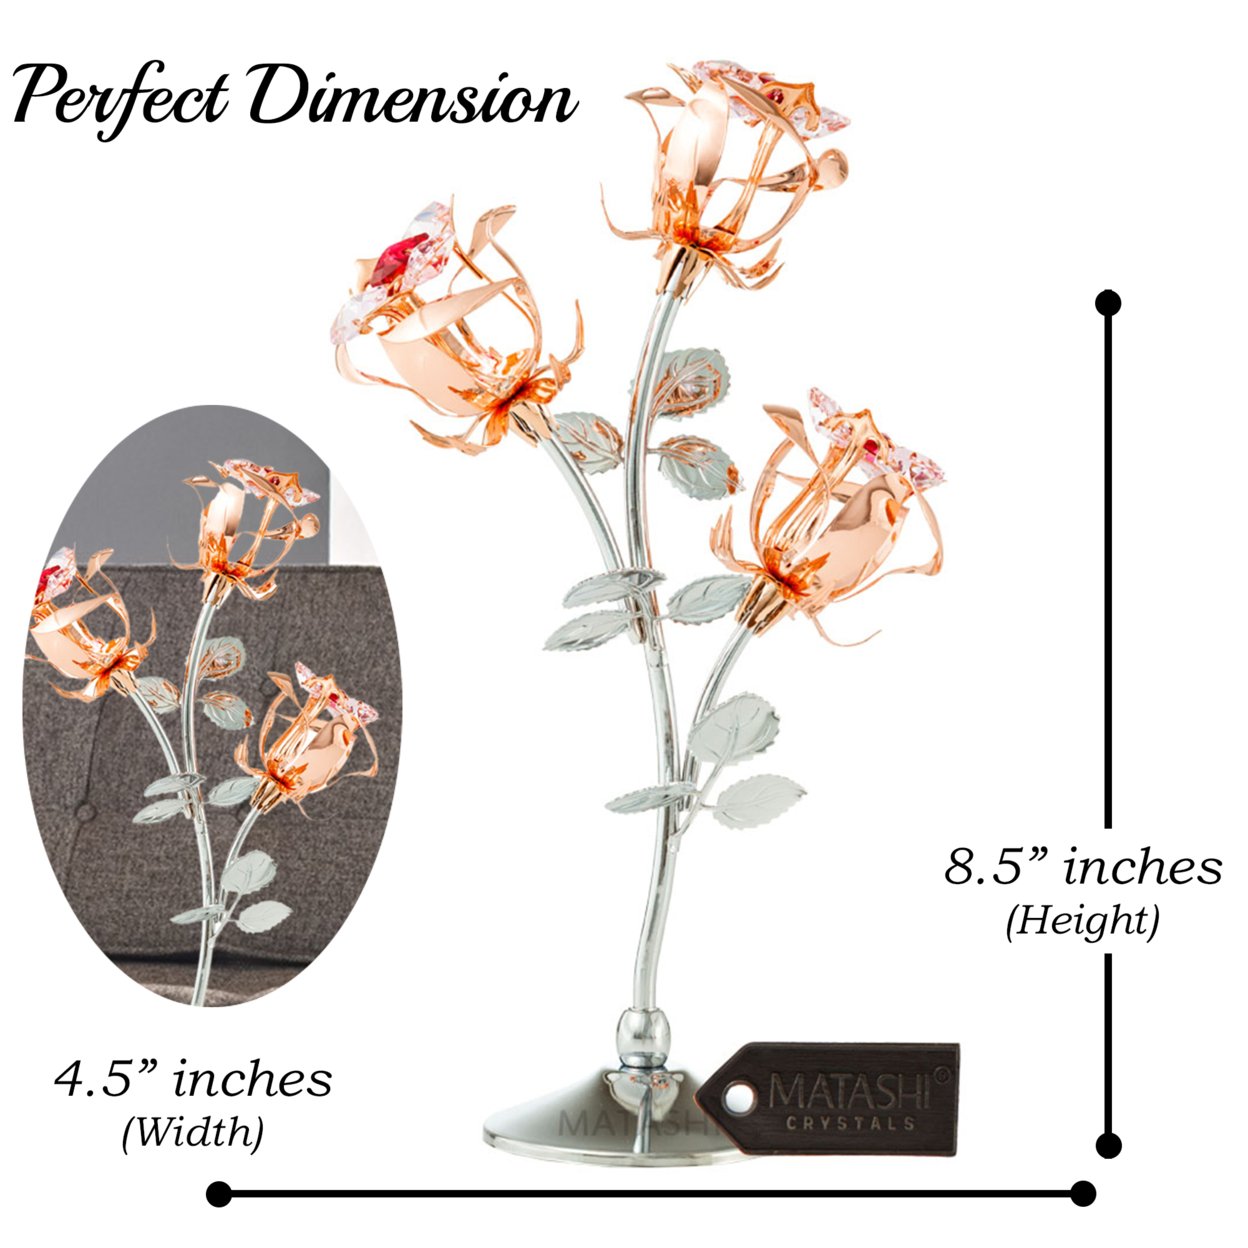 Matashi Rose Gold And Chrome Plated Rose Flower Tabletop Ornament W/ Red & Pink Crystals, Metal Floral Arrangement